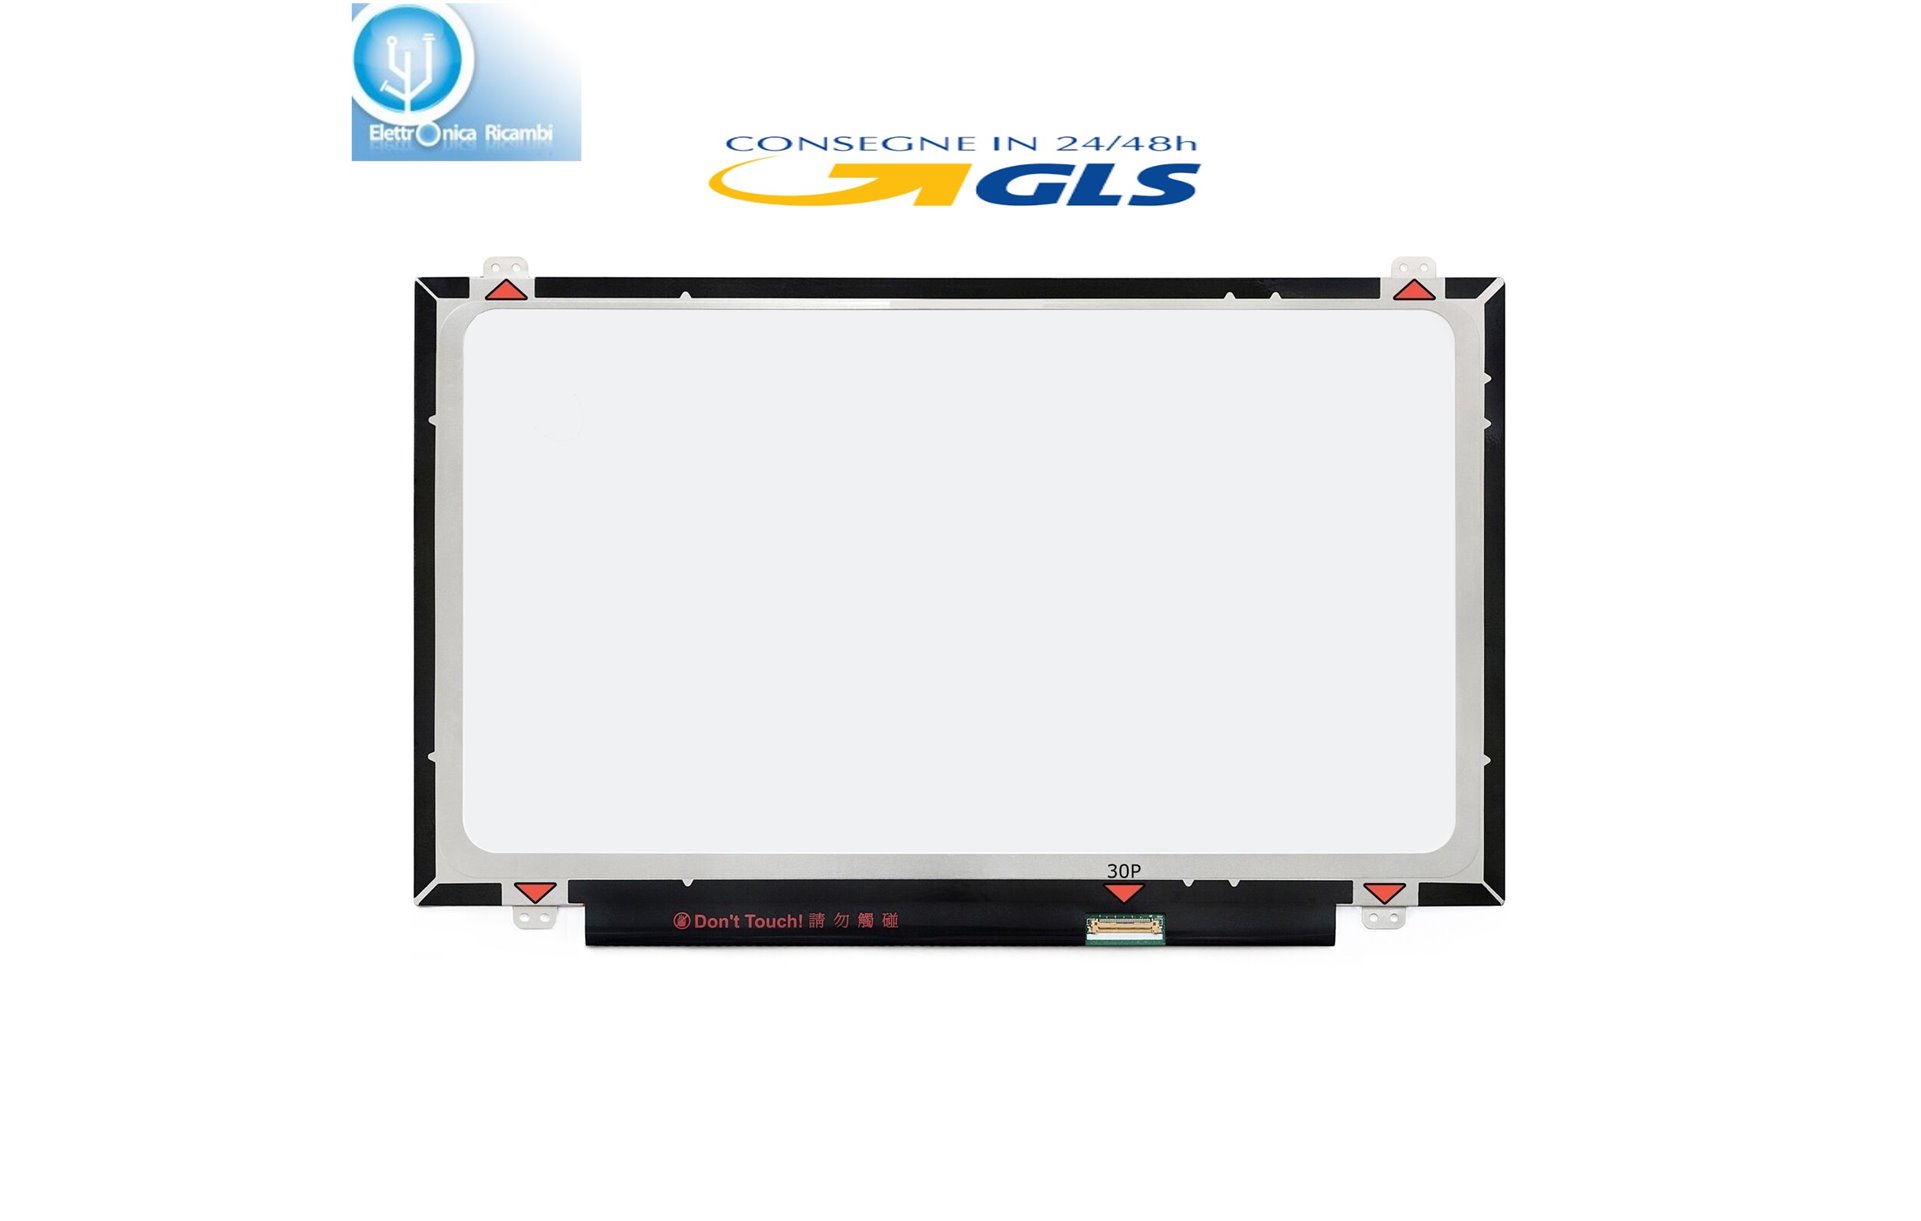 Display LCD Schermo Acer ASPIRE 1 A114-32 SERIES 14.0 LED SLIM 30 pin HD (1366x768)